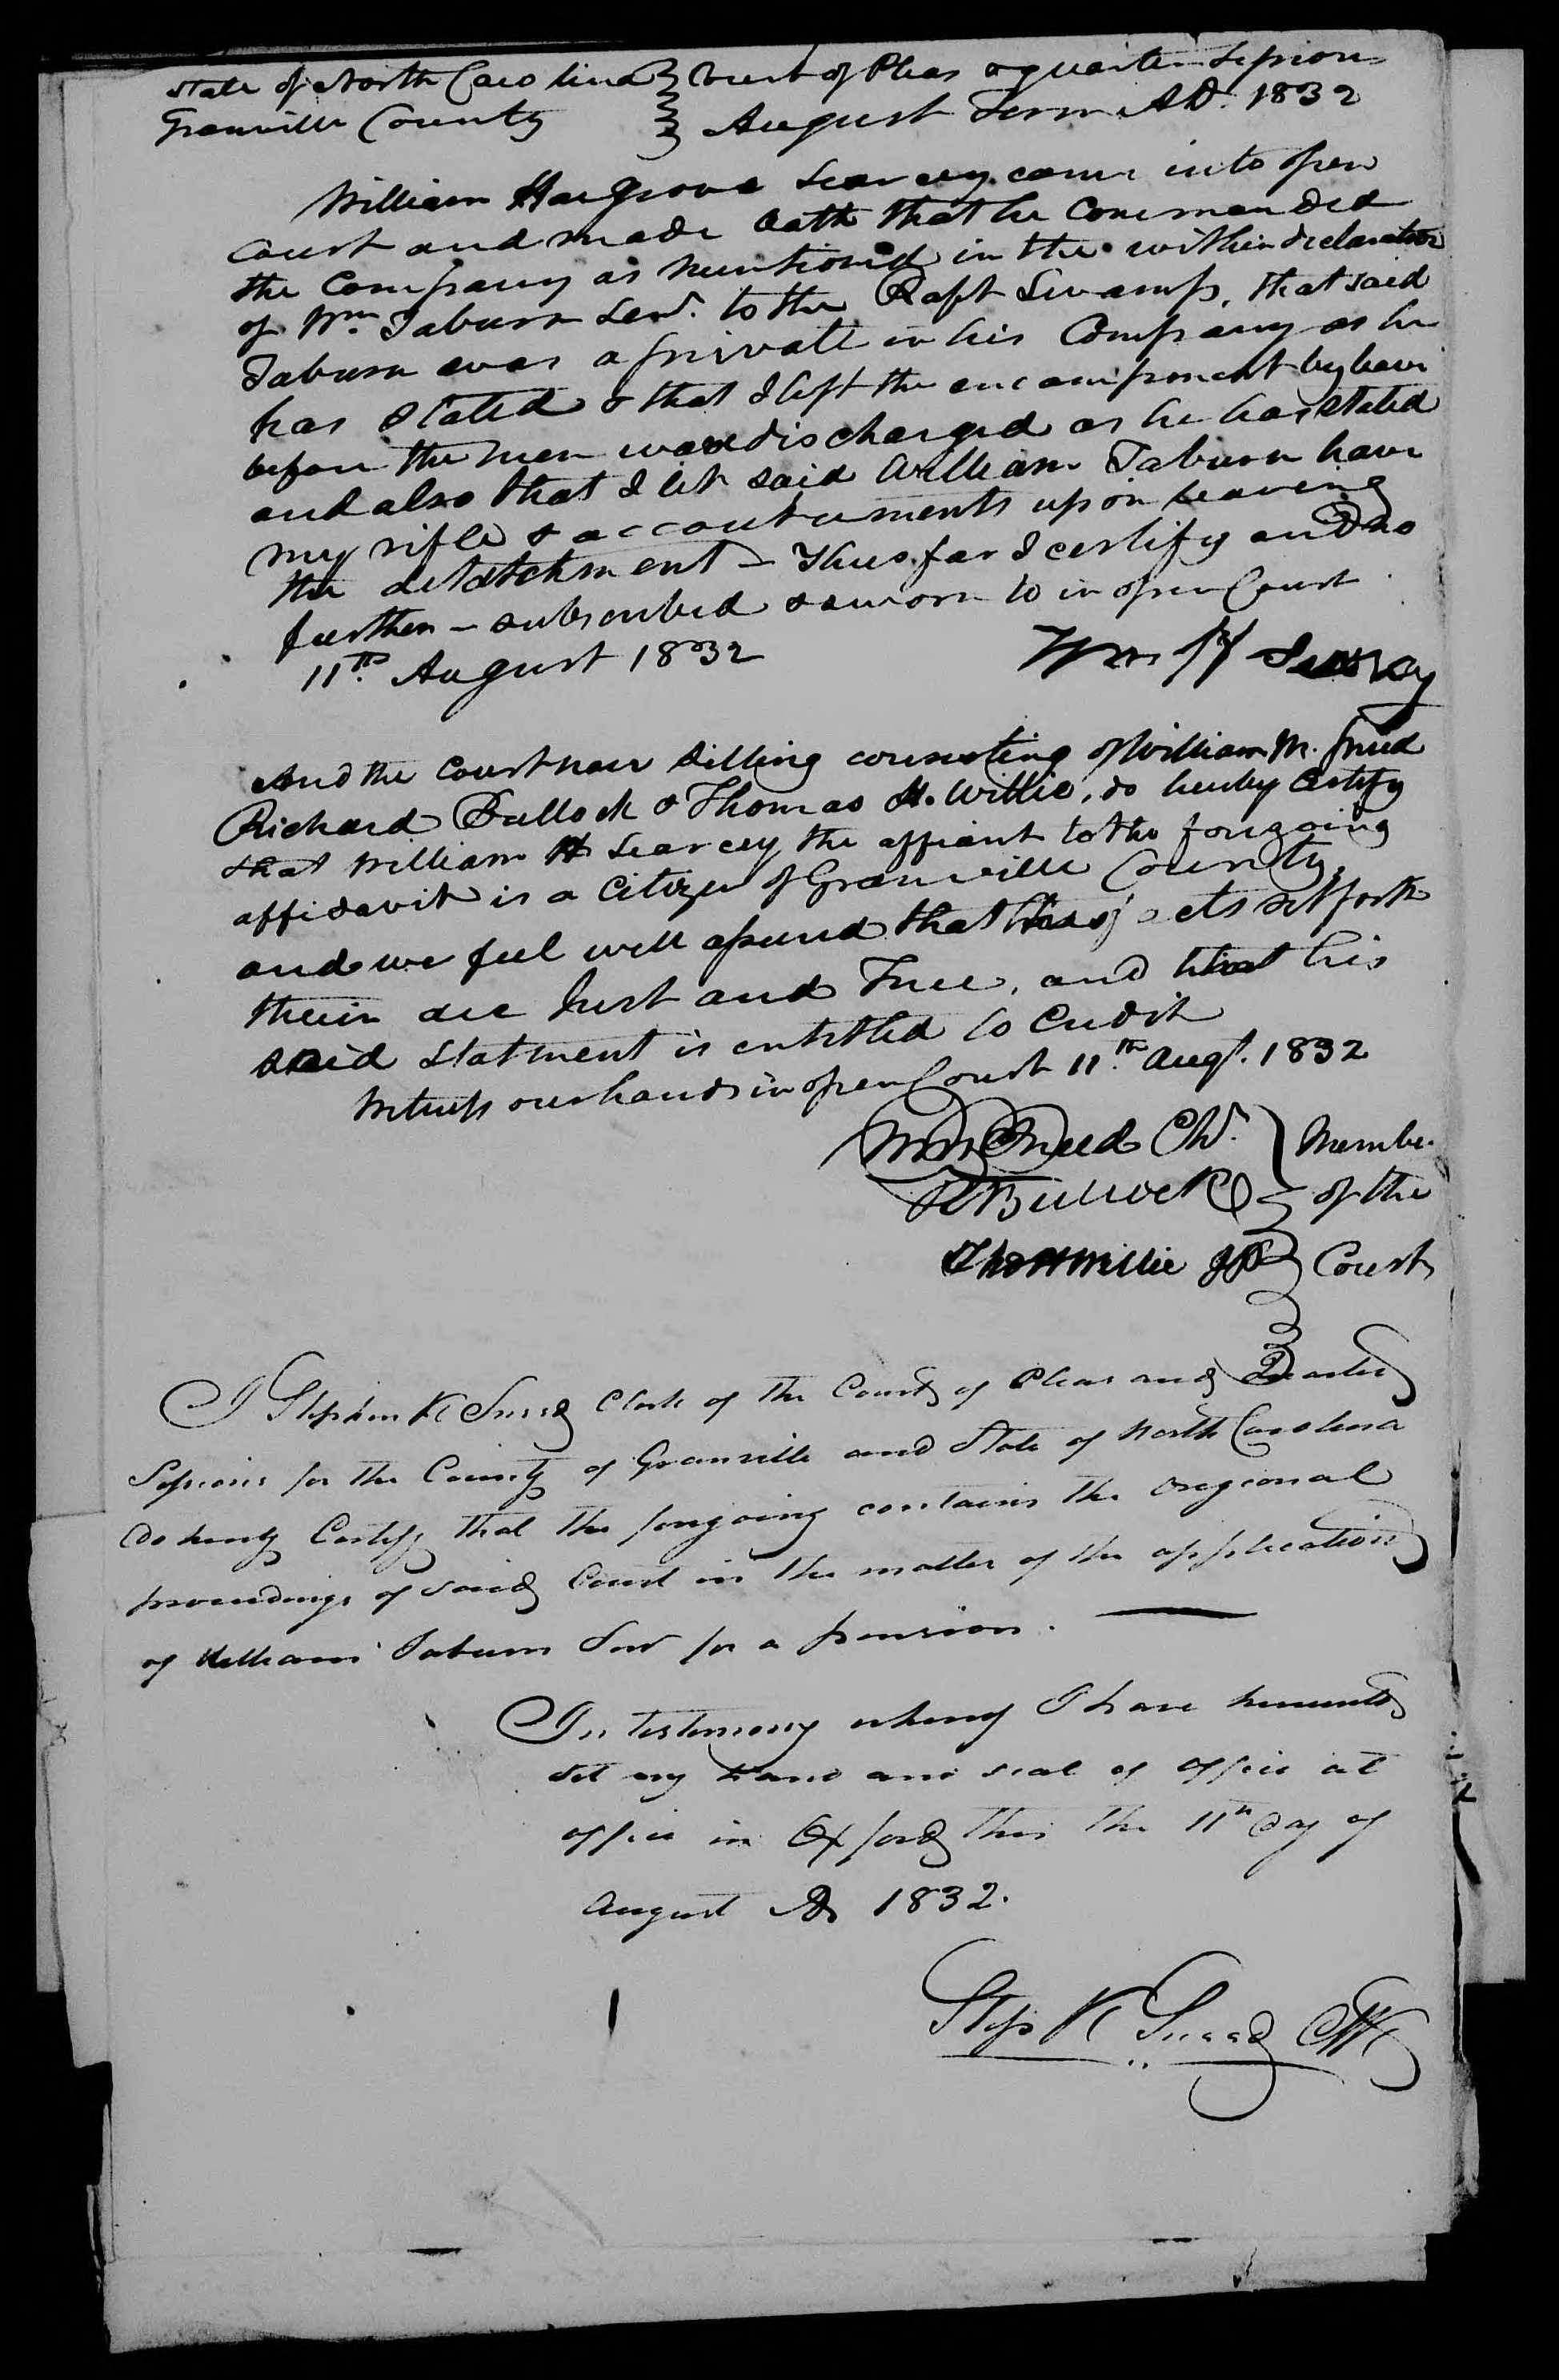 Affidavit of William Henry Searcy in support of a Pension Claim for William Taburn, 11 August 1832